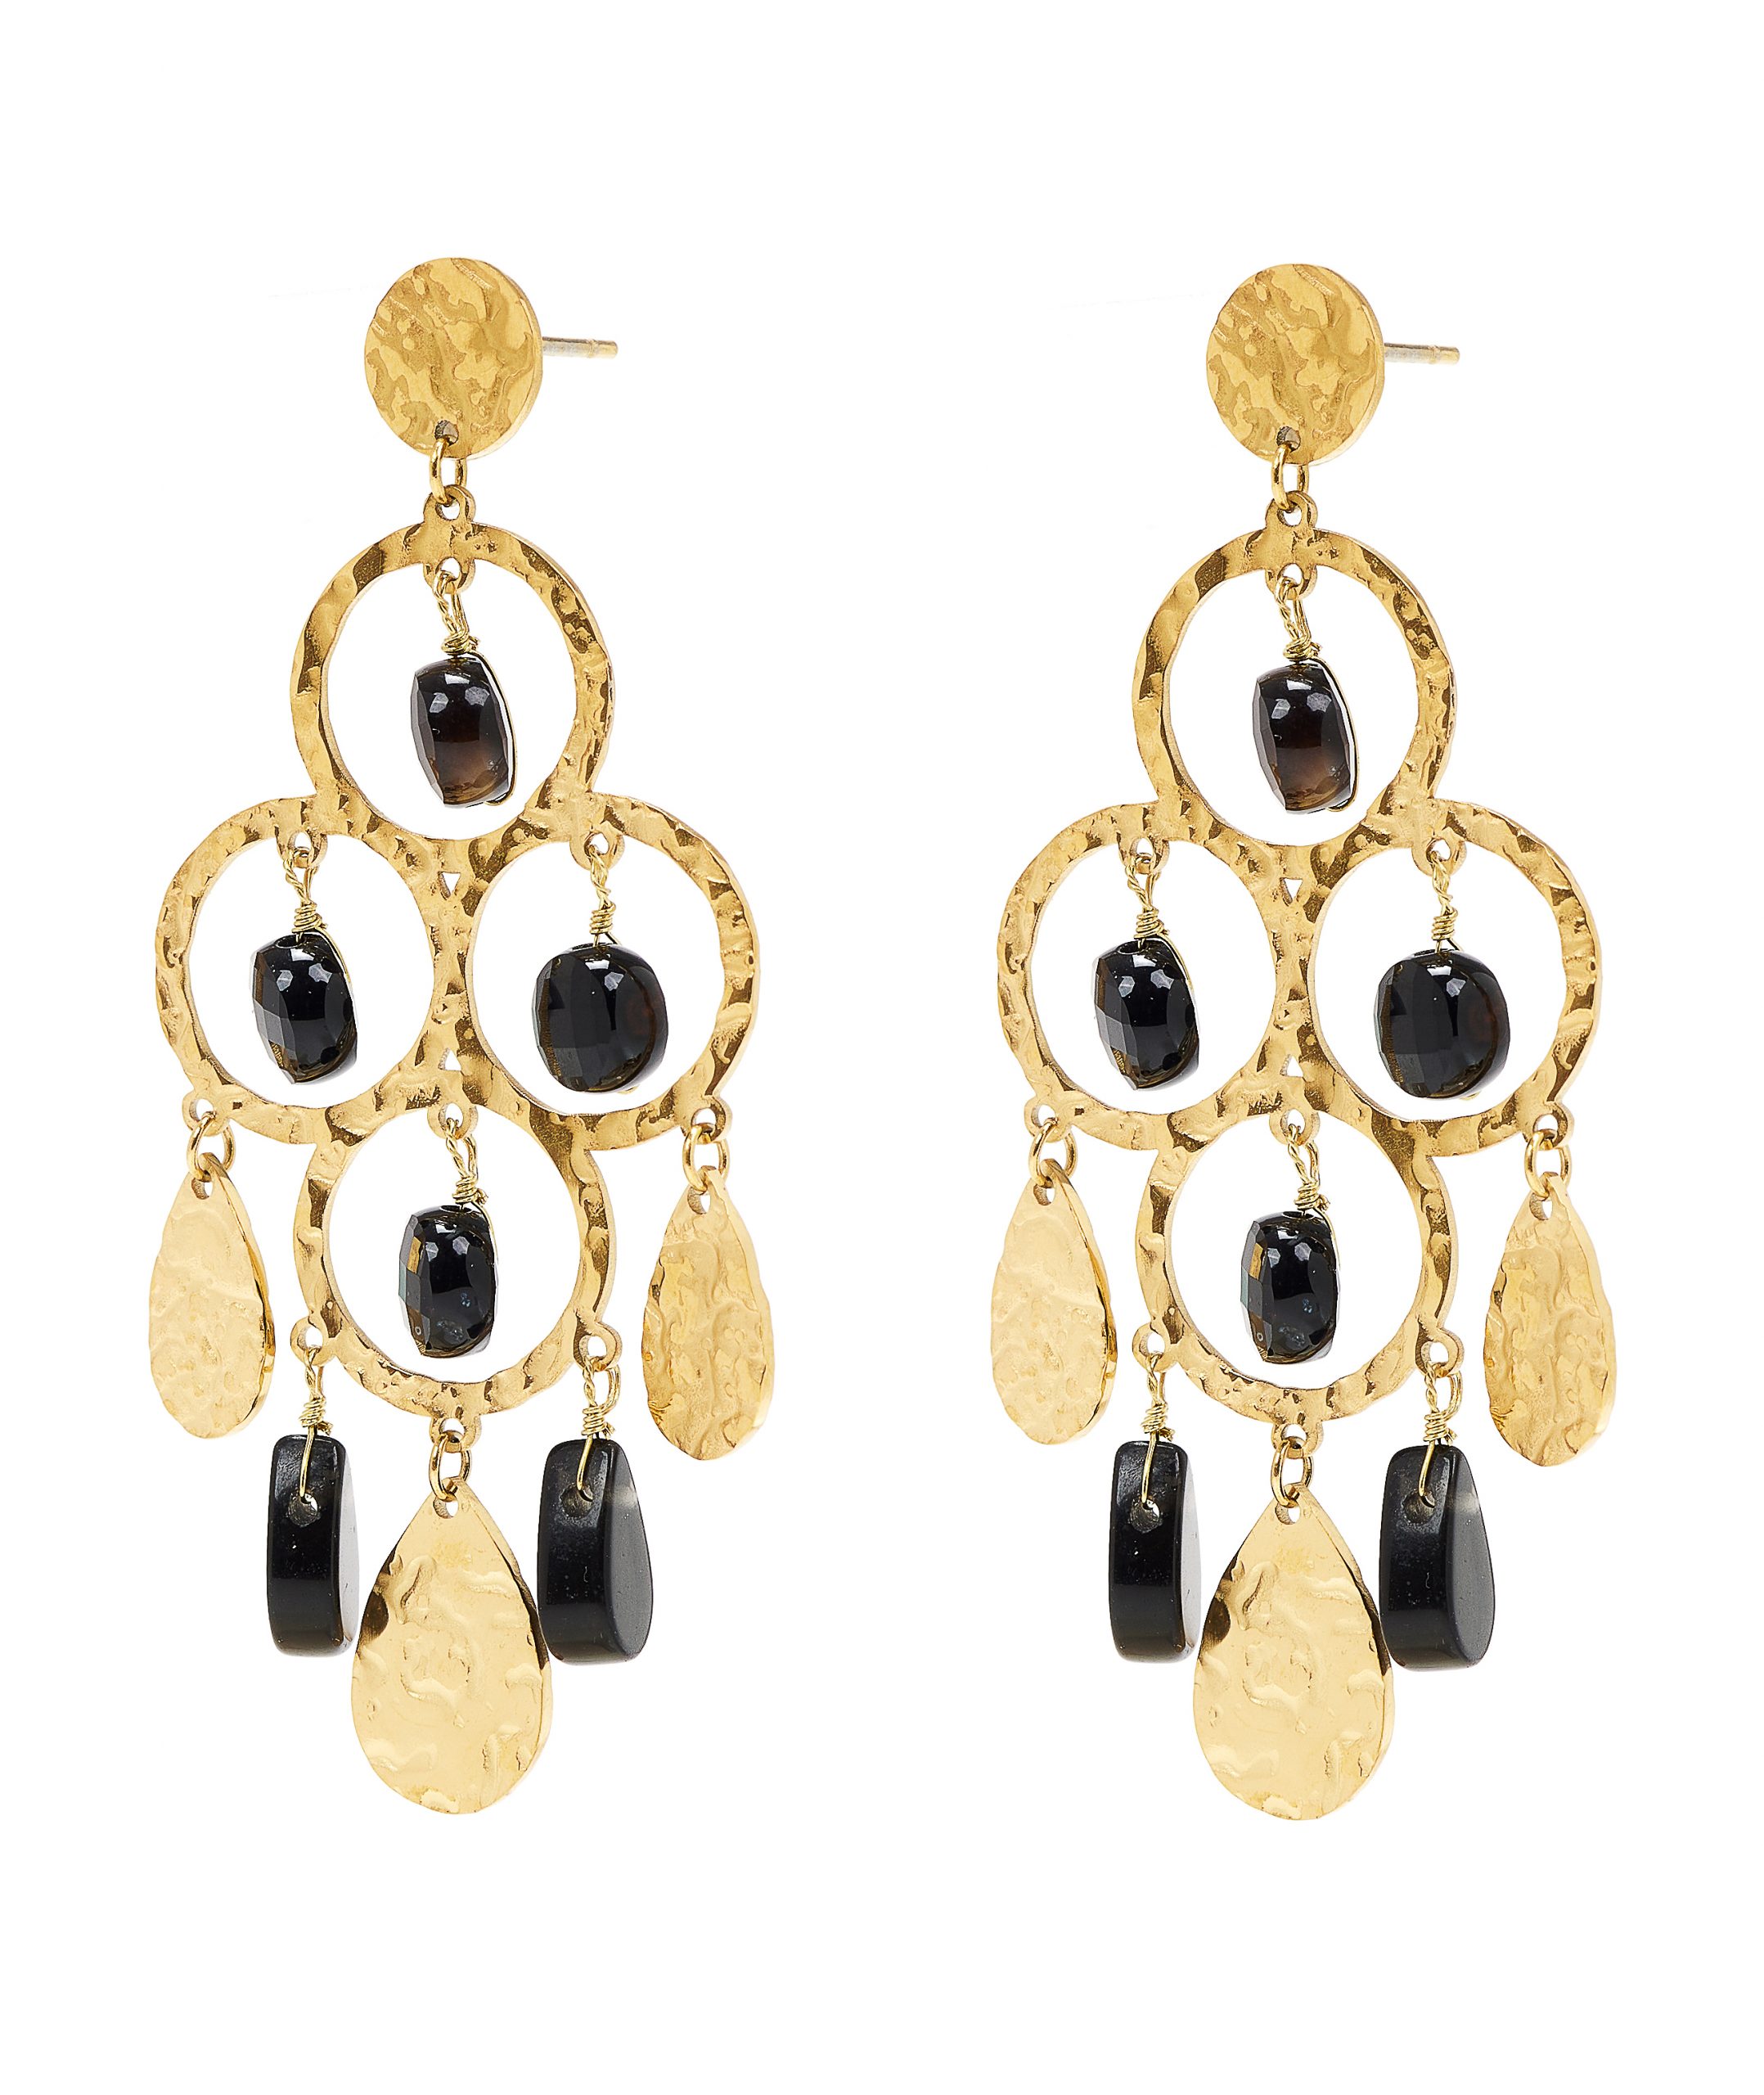 Black Stones and Coins Earring by TFD